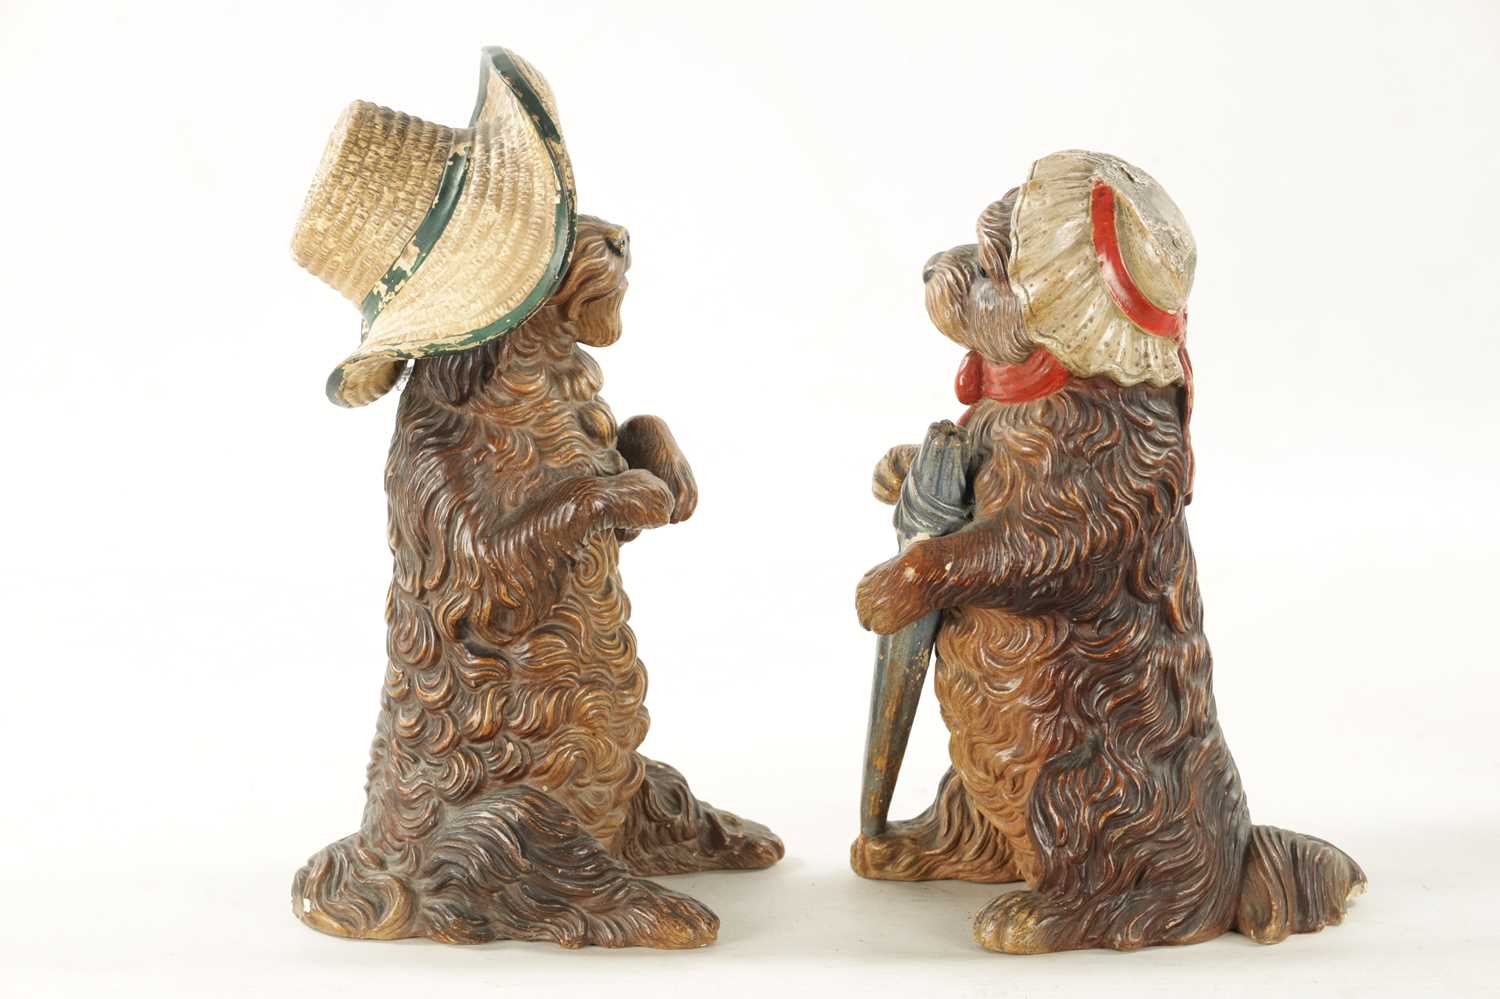 A PAIR OF LATE 19TH CENTURY AUSTRIAN COLD-PAINTED TERRACOTTA MODELS OF DOGS - Image 5 of 8